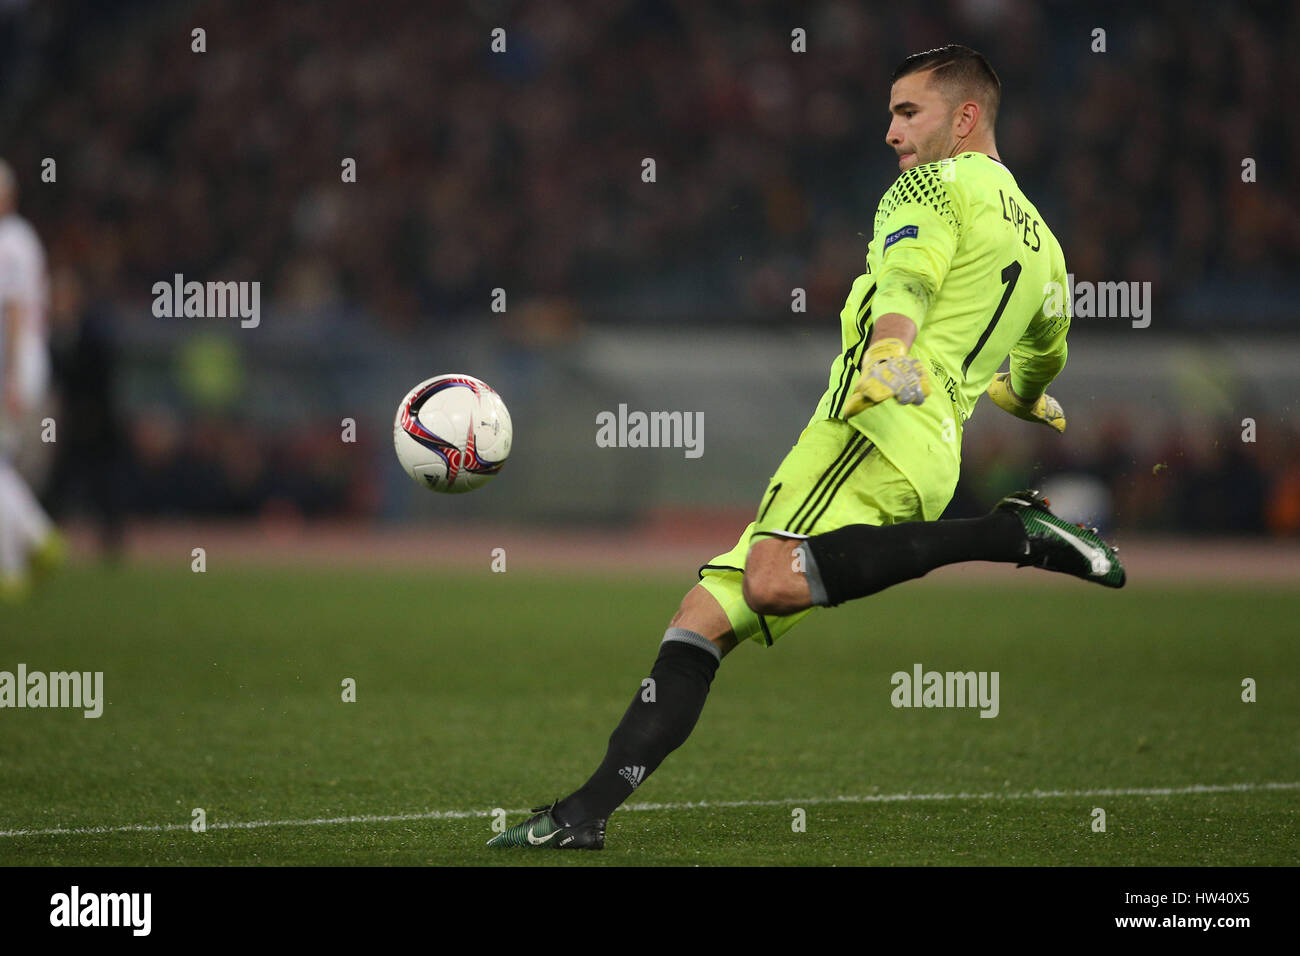 Rome, Italy 16 March, 2017: Anthony Lopes in action during the  Uefa  league match between A.s. Roma vs Olympique Lyonnais  at Olympic Stadium in Rome on March, 2017 Credit: marco iacobucci/Alamy Live News Stock Photo